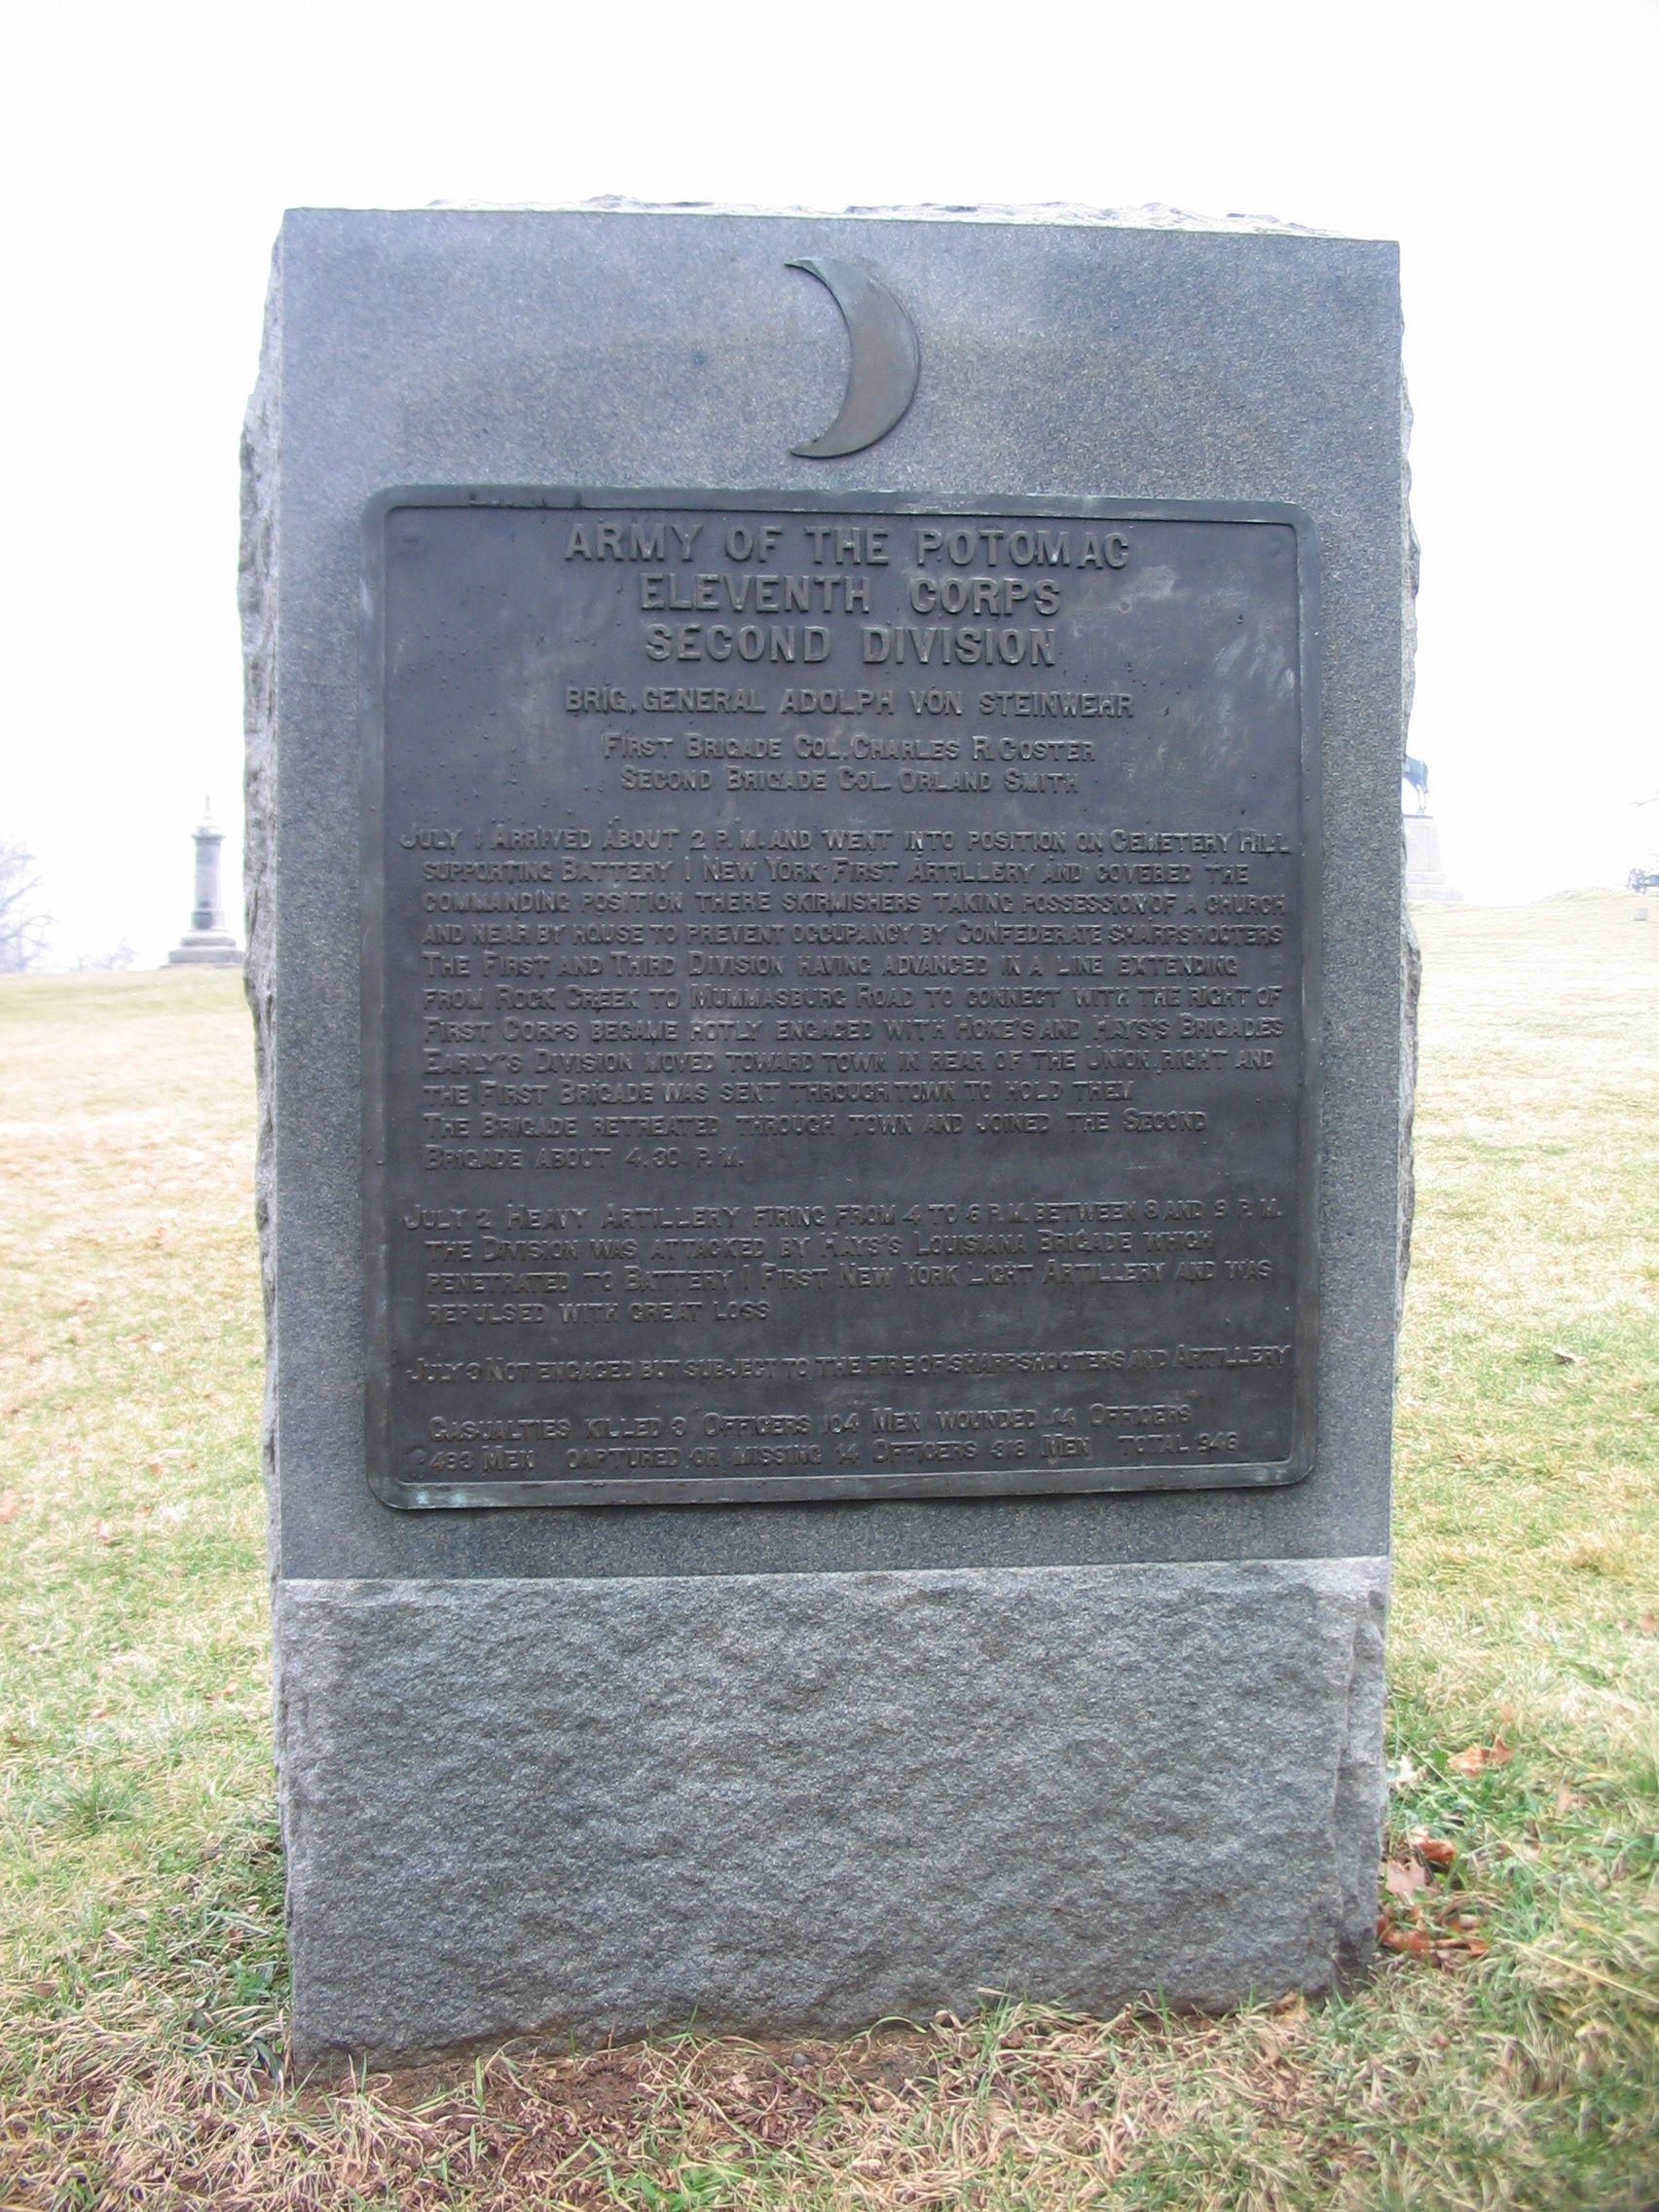 Second Division, Eleventh Corps Tablet